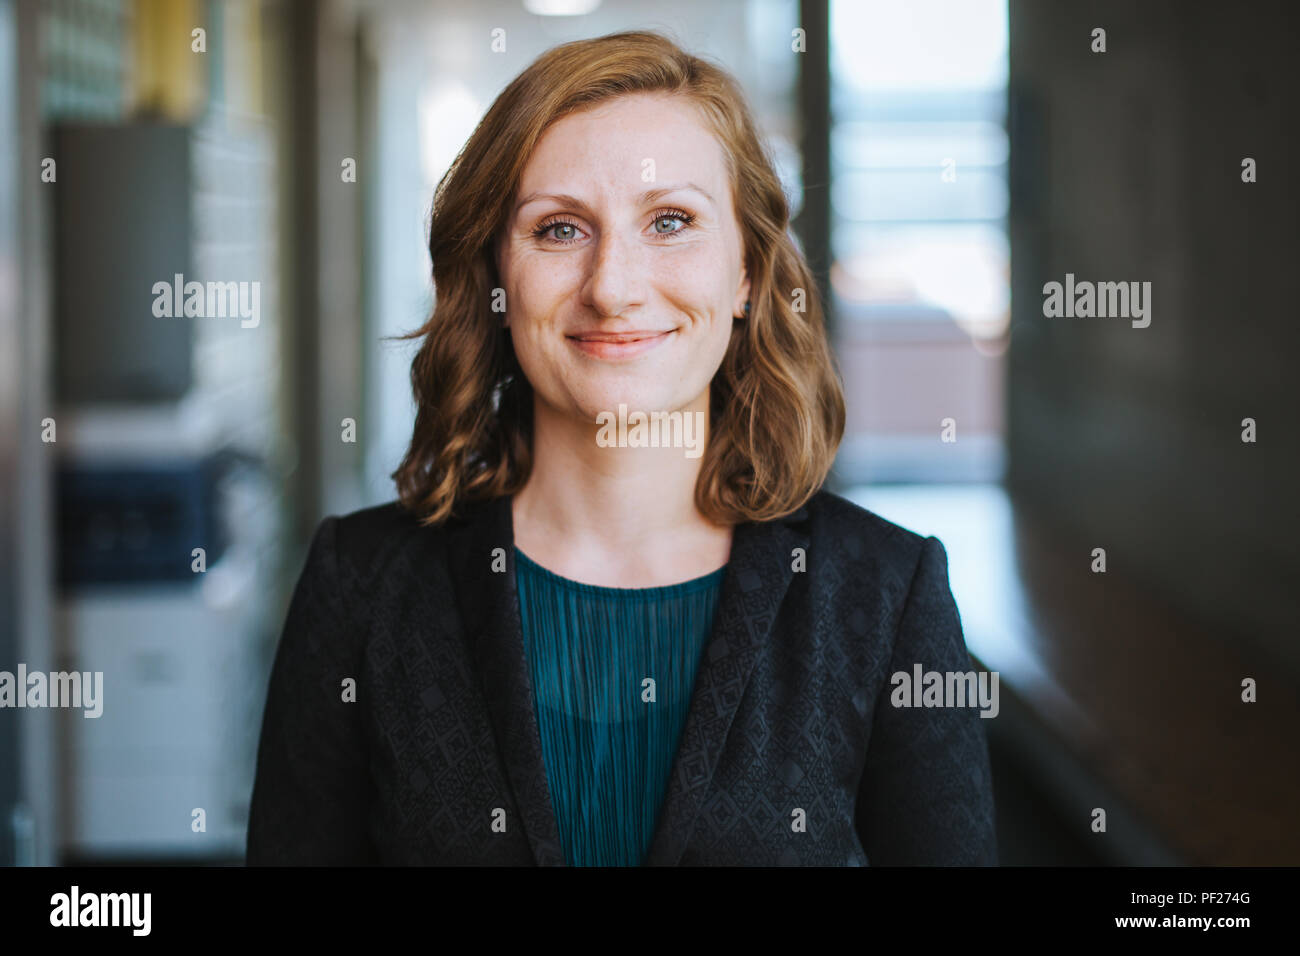 elegant and confident business woman smiles at the camera Stock Photo